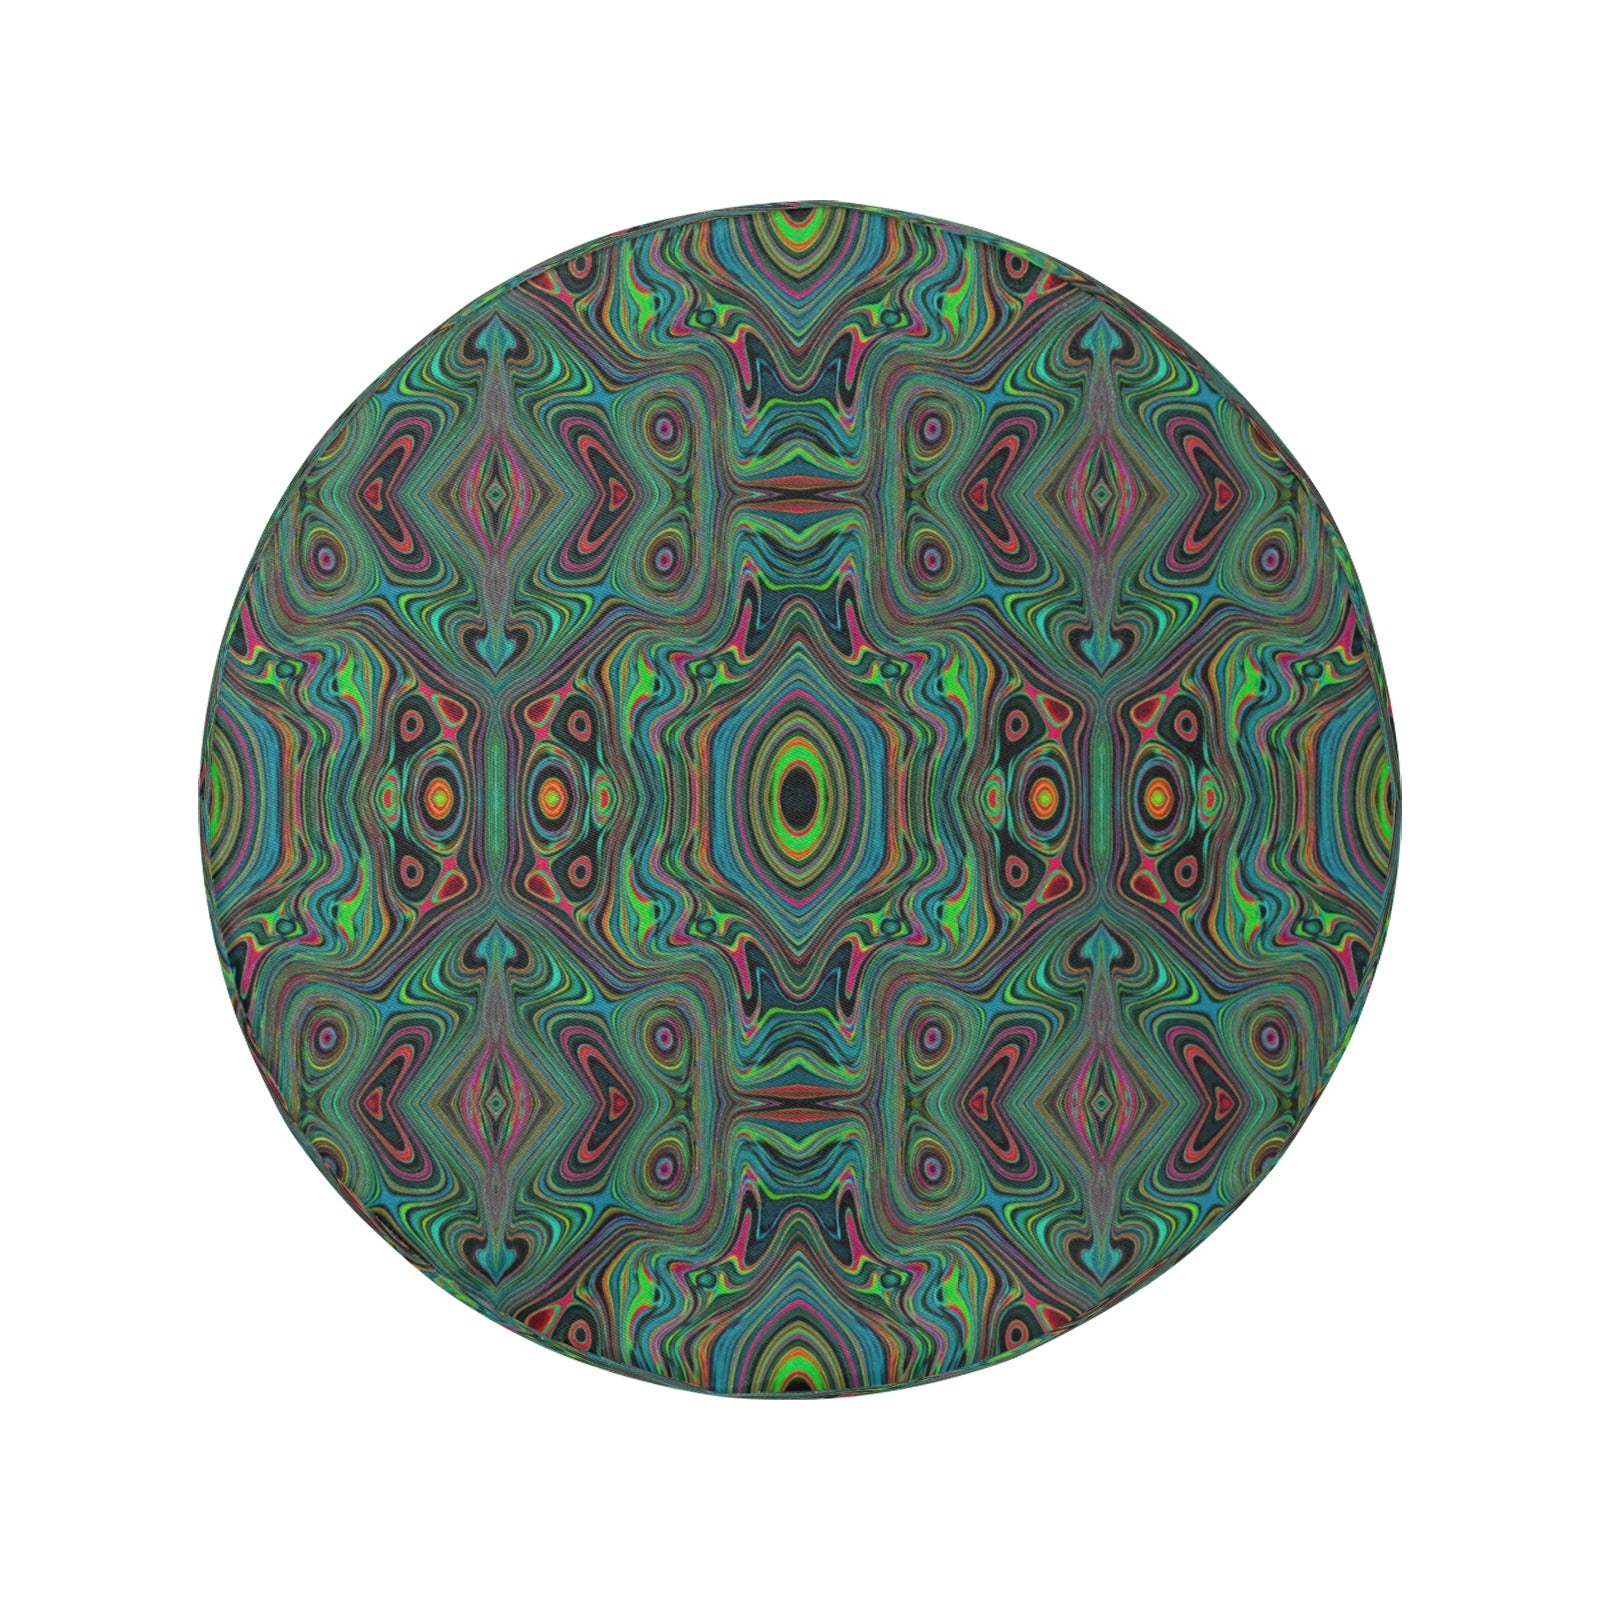 Spare Tire Covers, Trippy Retro Black and Lime Green Abstract Pattern - Large